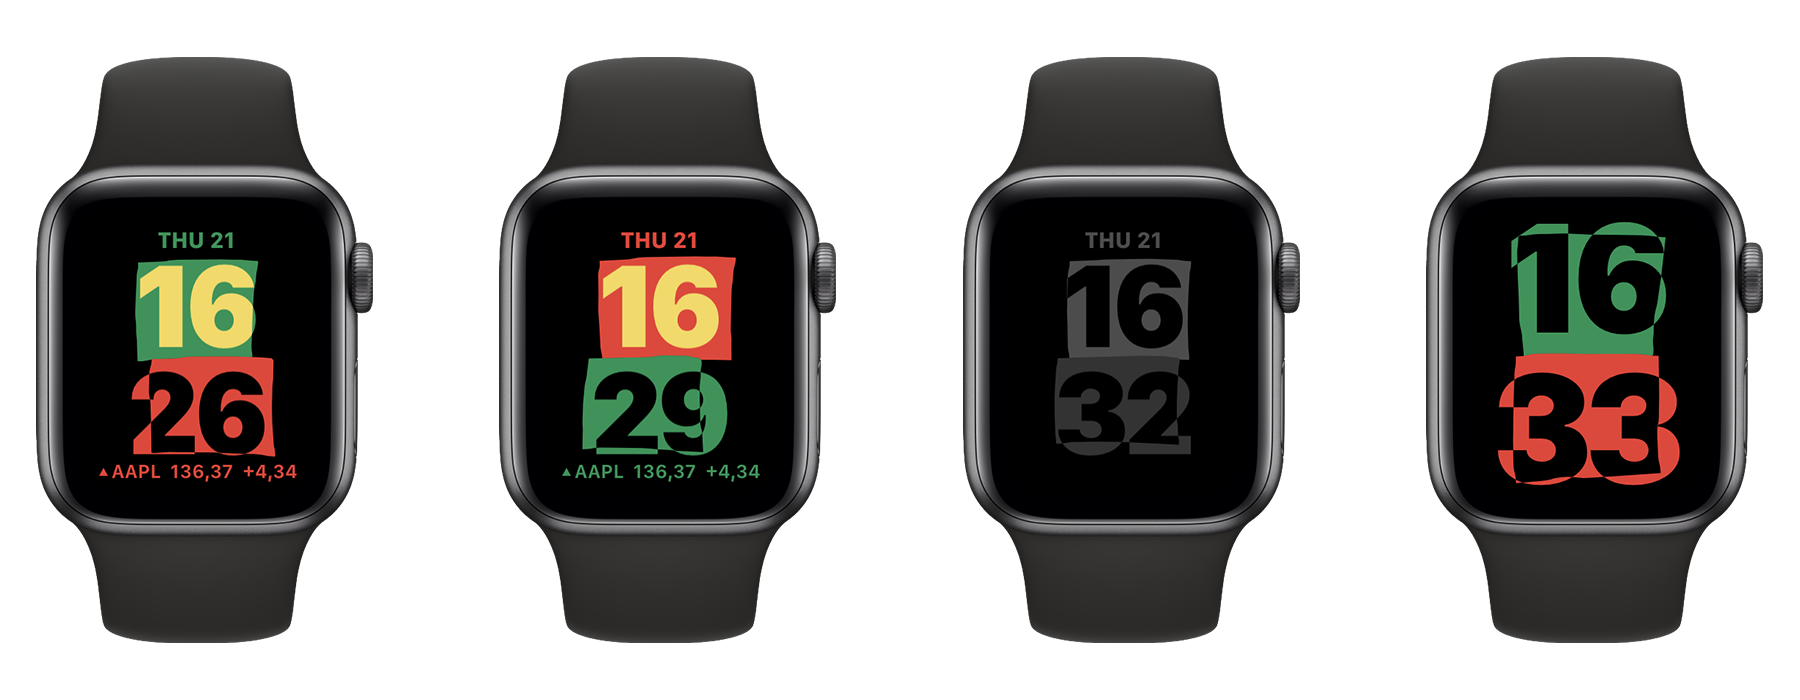 Gallery Here's a first look at the new watchOS 7.3 'Unity' watch face